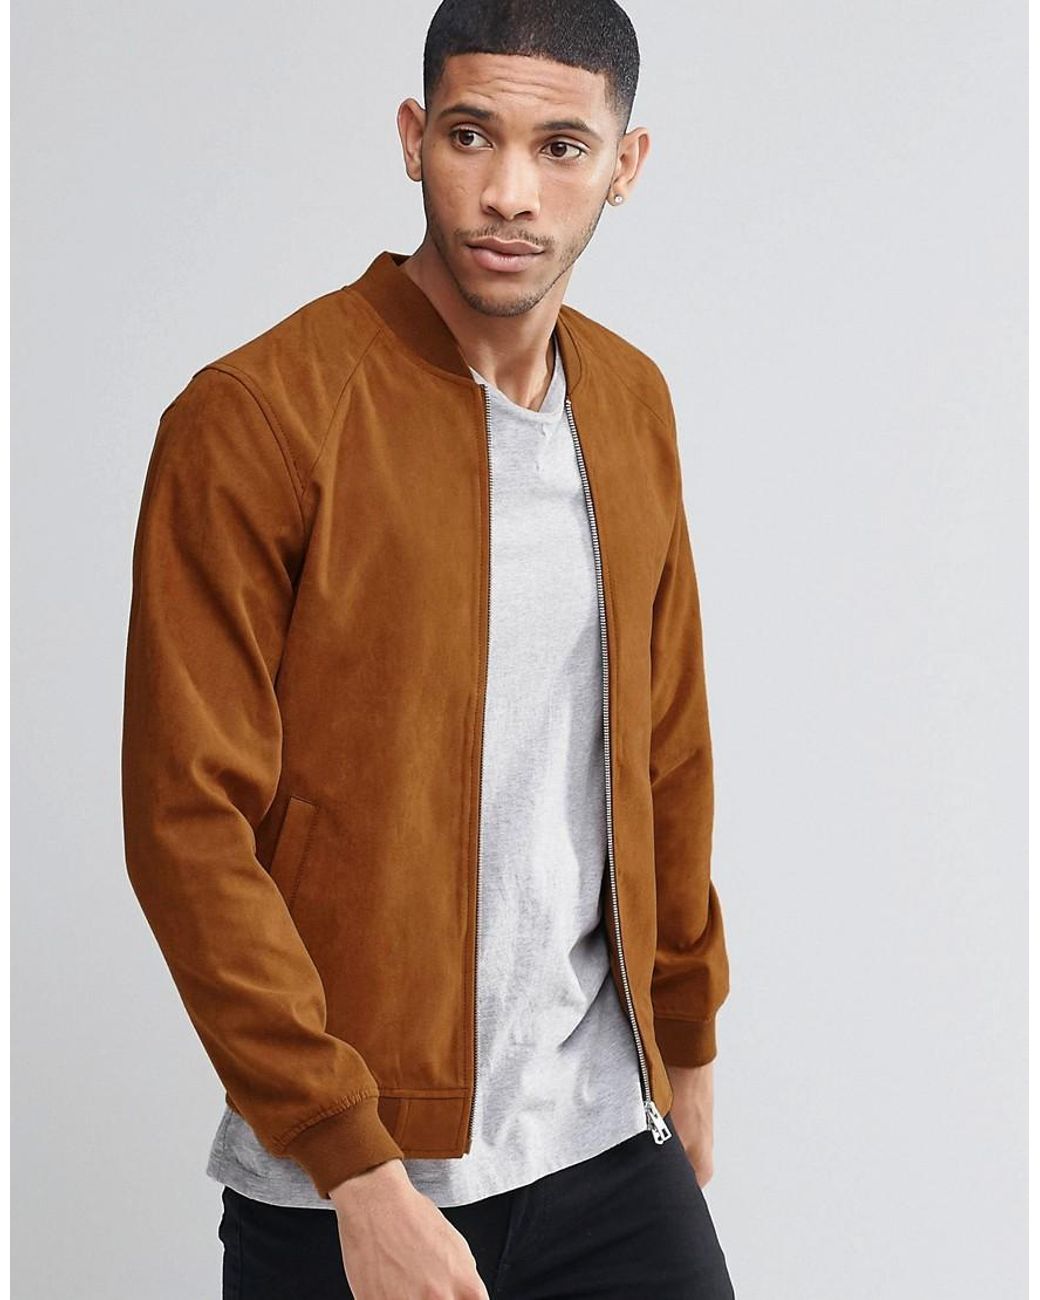 Pull&Bear Faux Suede Bomber Jacket In Tan Brown for Men Lyst